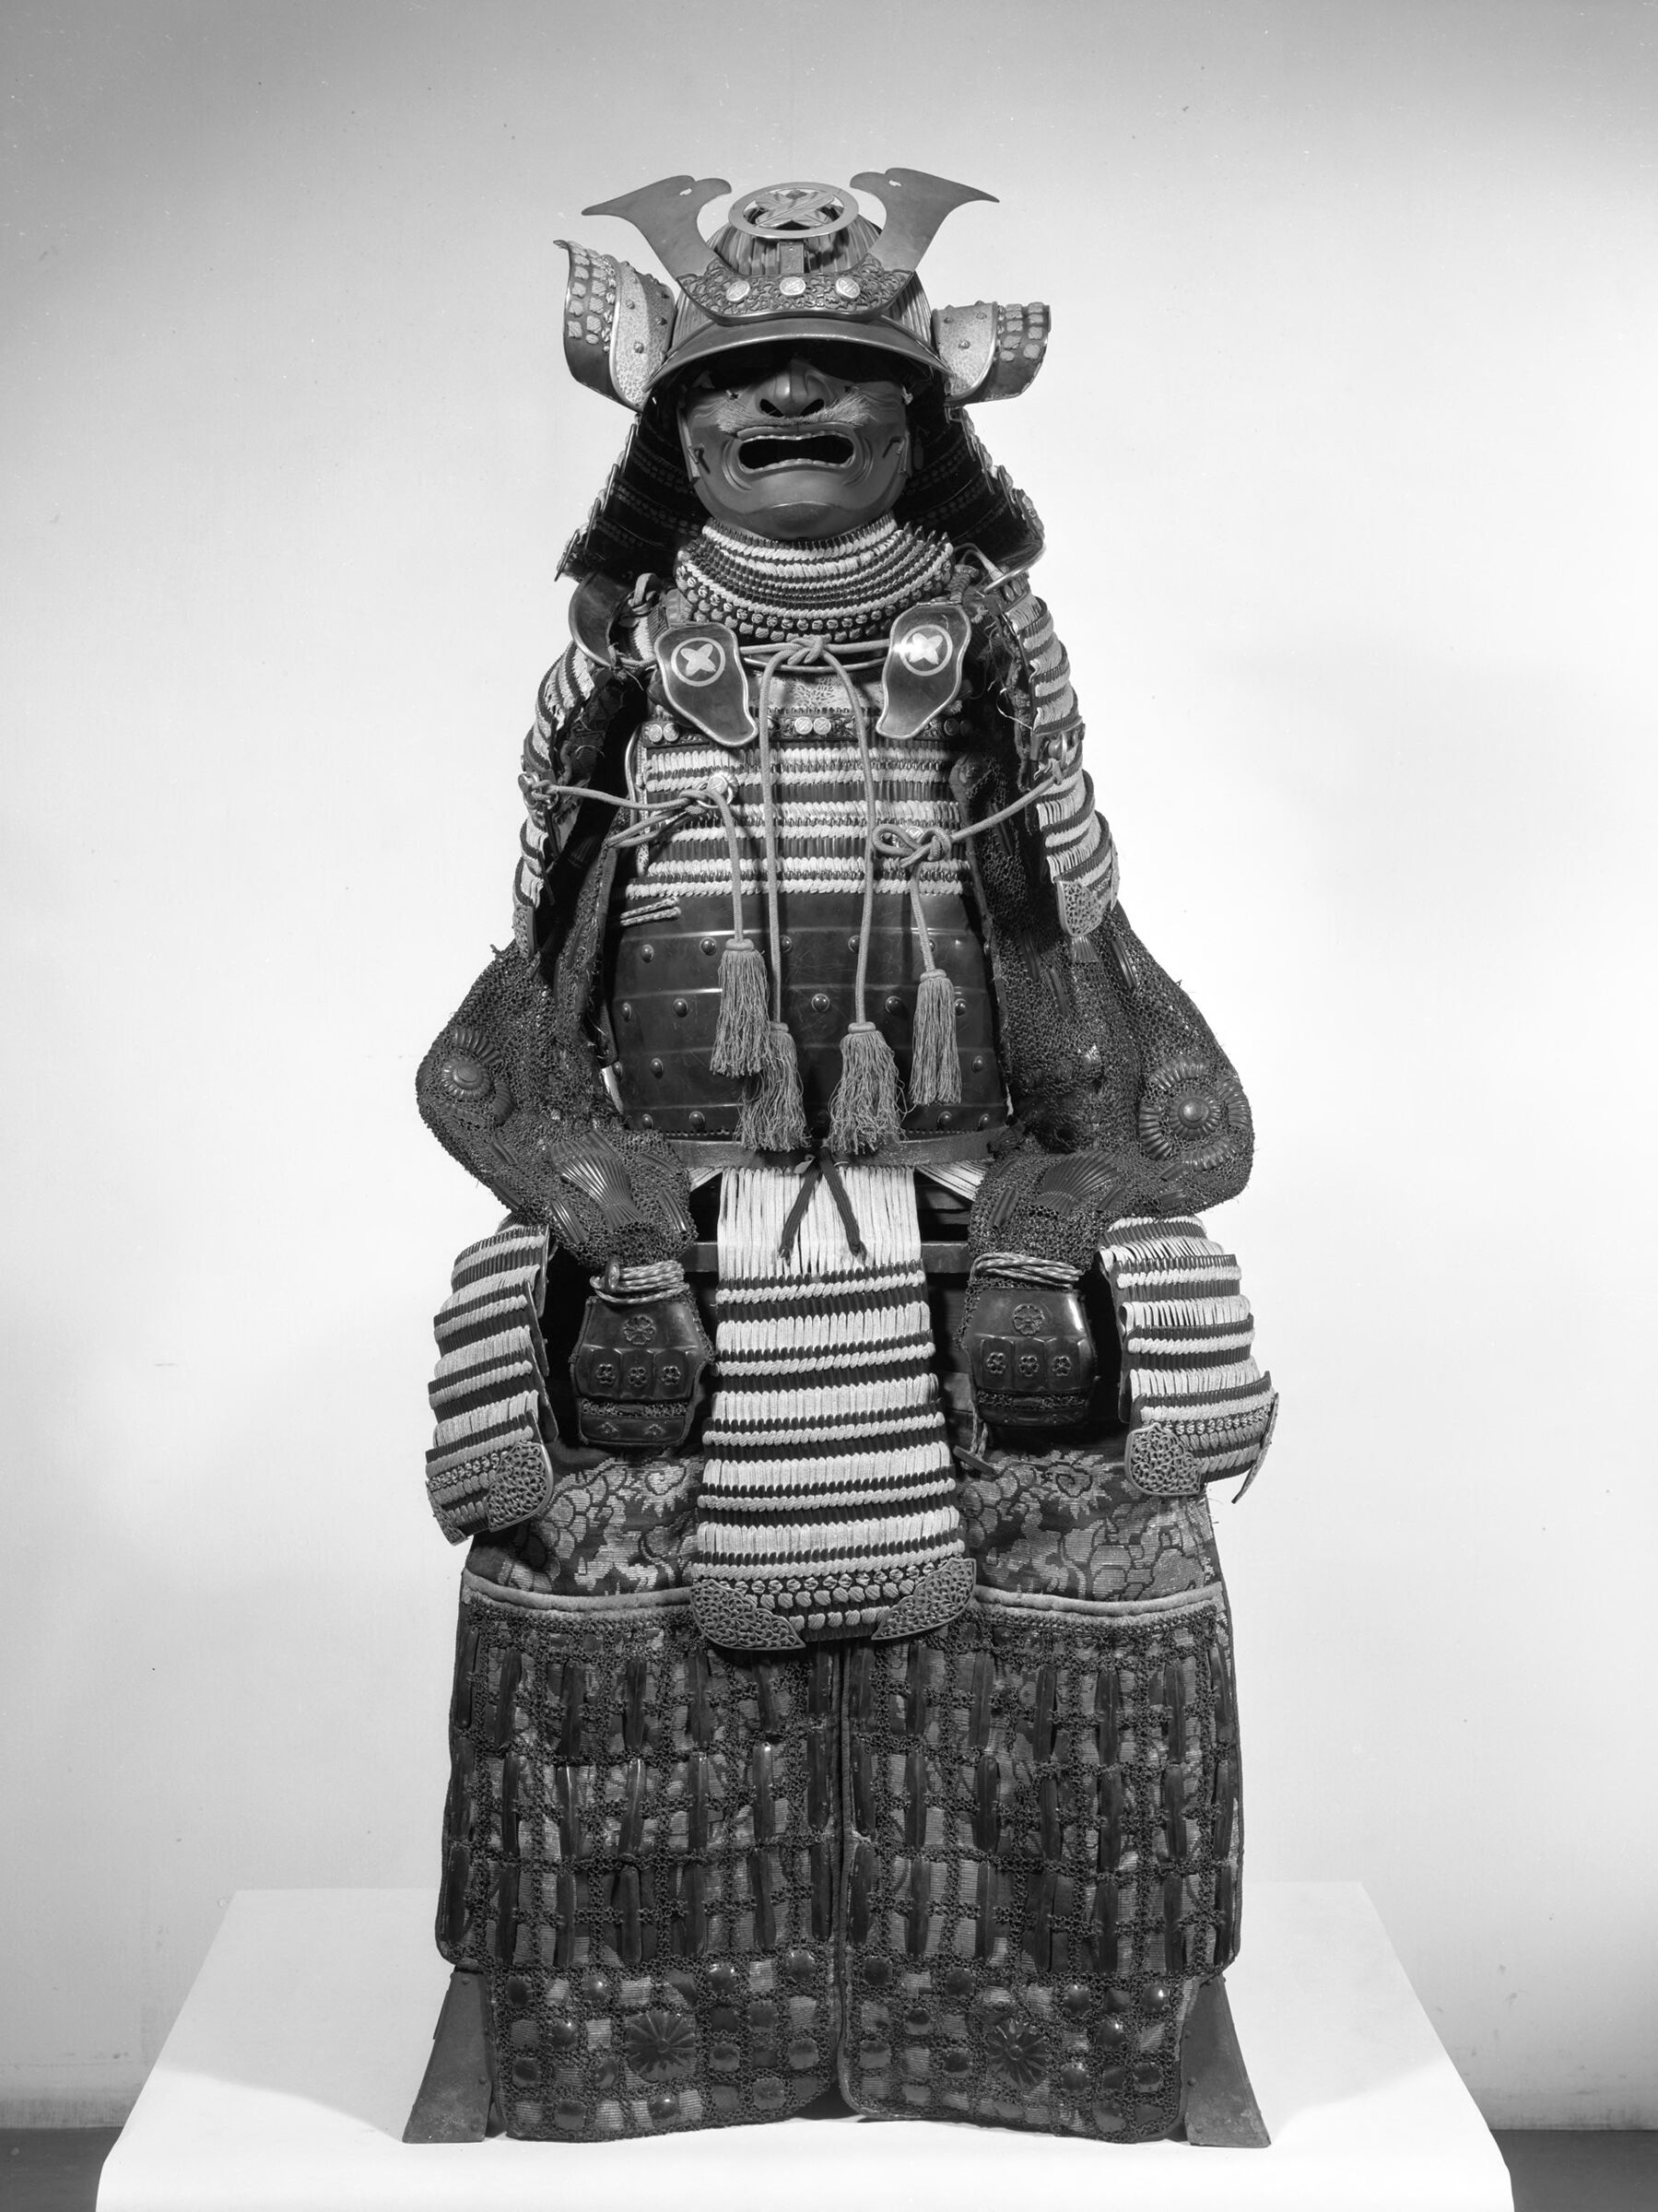 Suit Of Armor (Oyoroi) Bearing Crests Of The Abe Clan